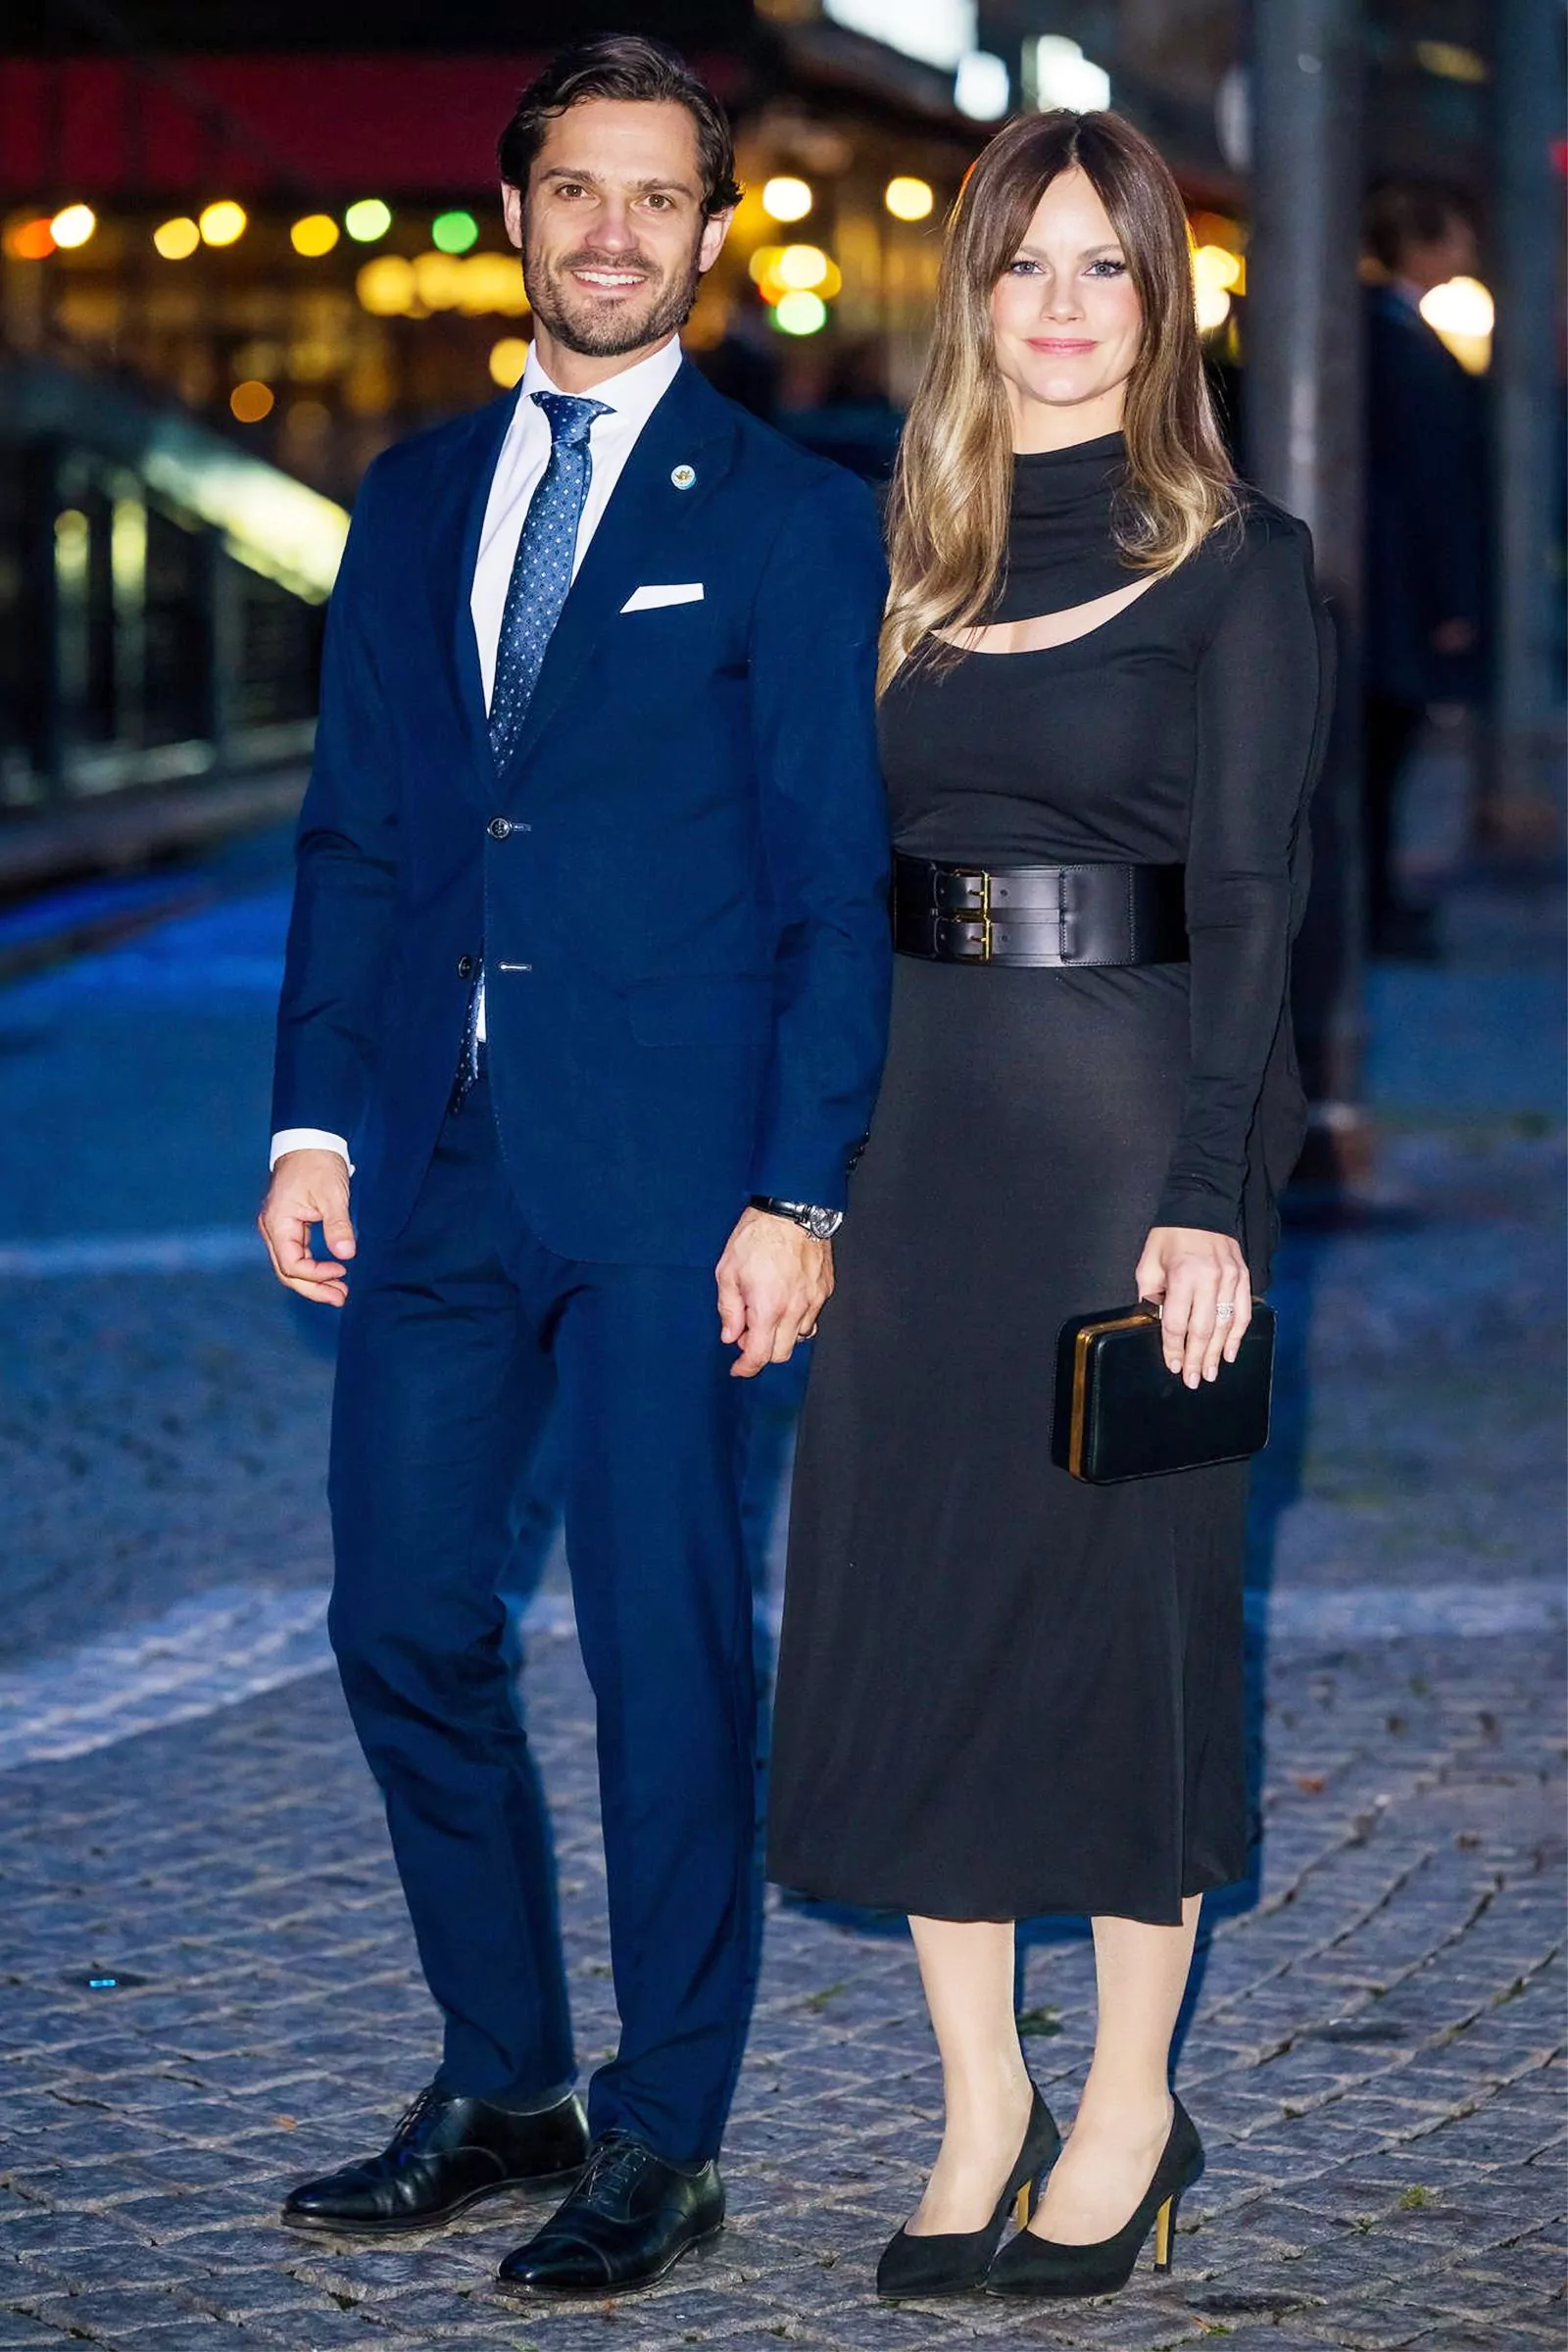 Prince Carl Philip and Princess Sofia at the traditional concert at the Stockholm Concert Hall in honor of the opening of parliament, September 27, 2022.